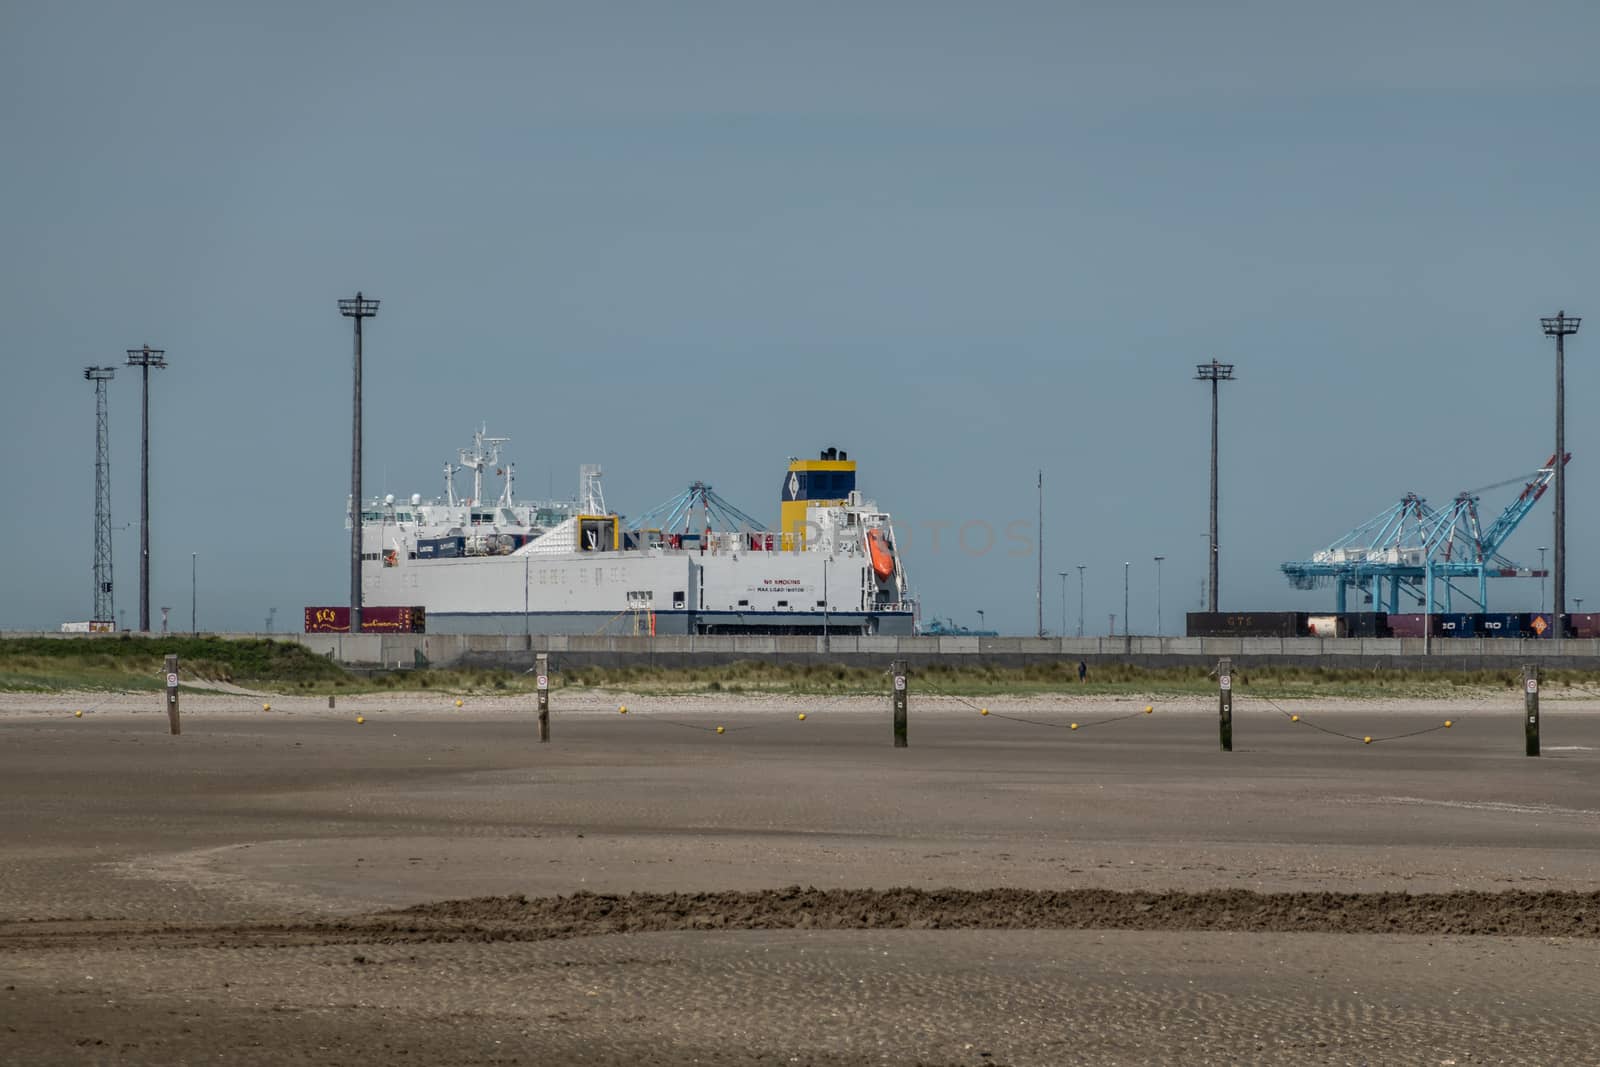 Ferry and container ship in Zeebrugge port, Flanders, Belgium. by Claudine